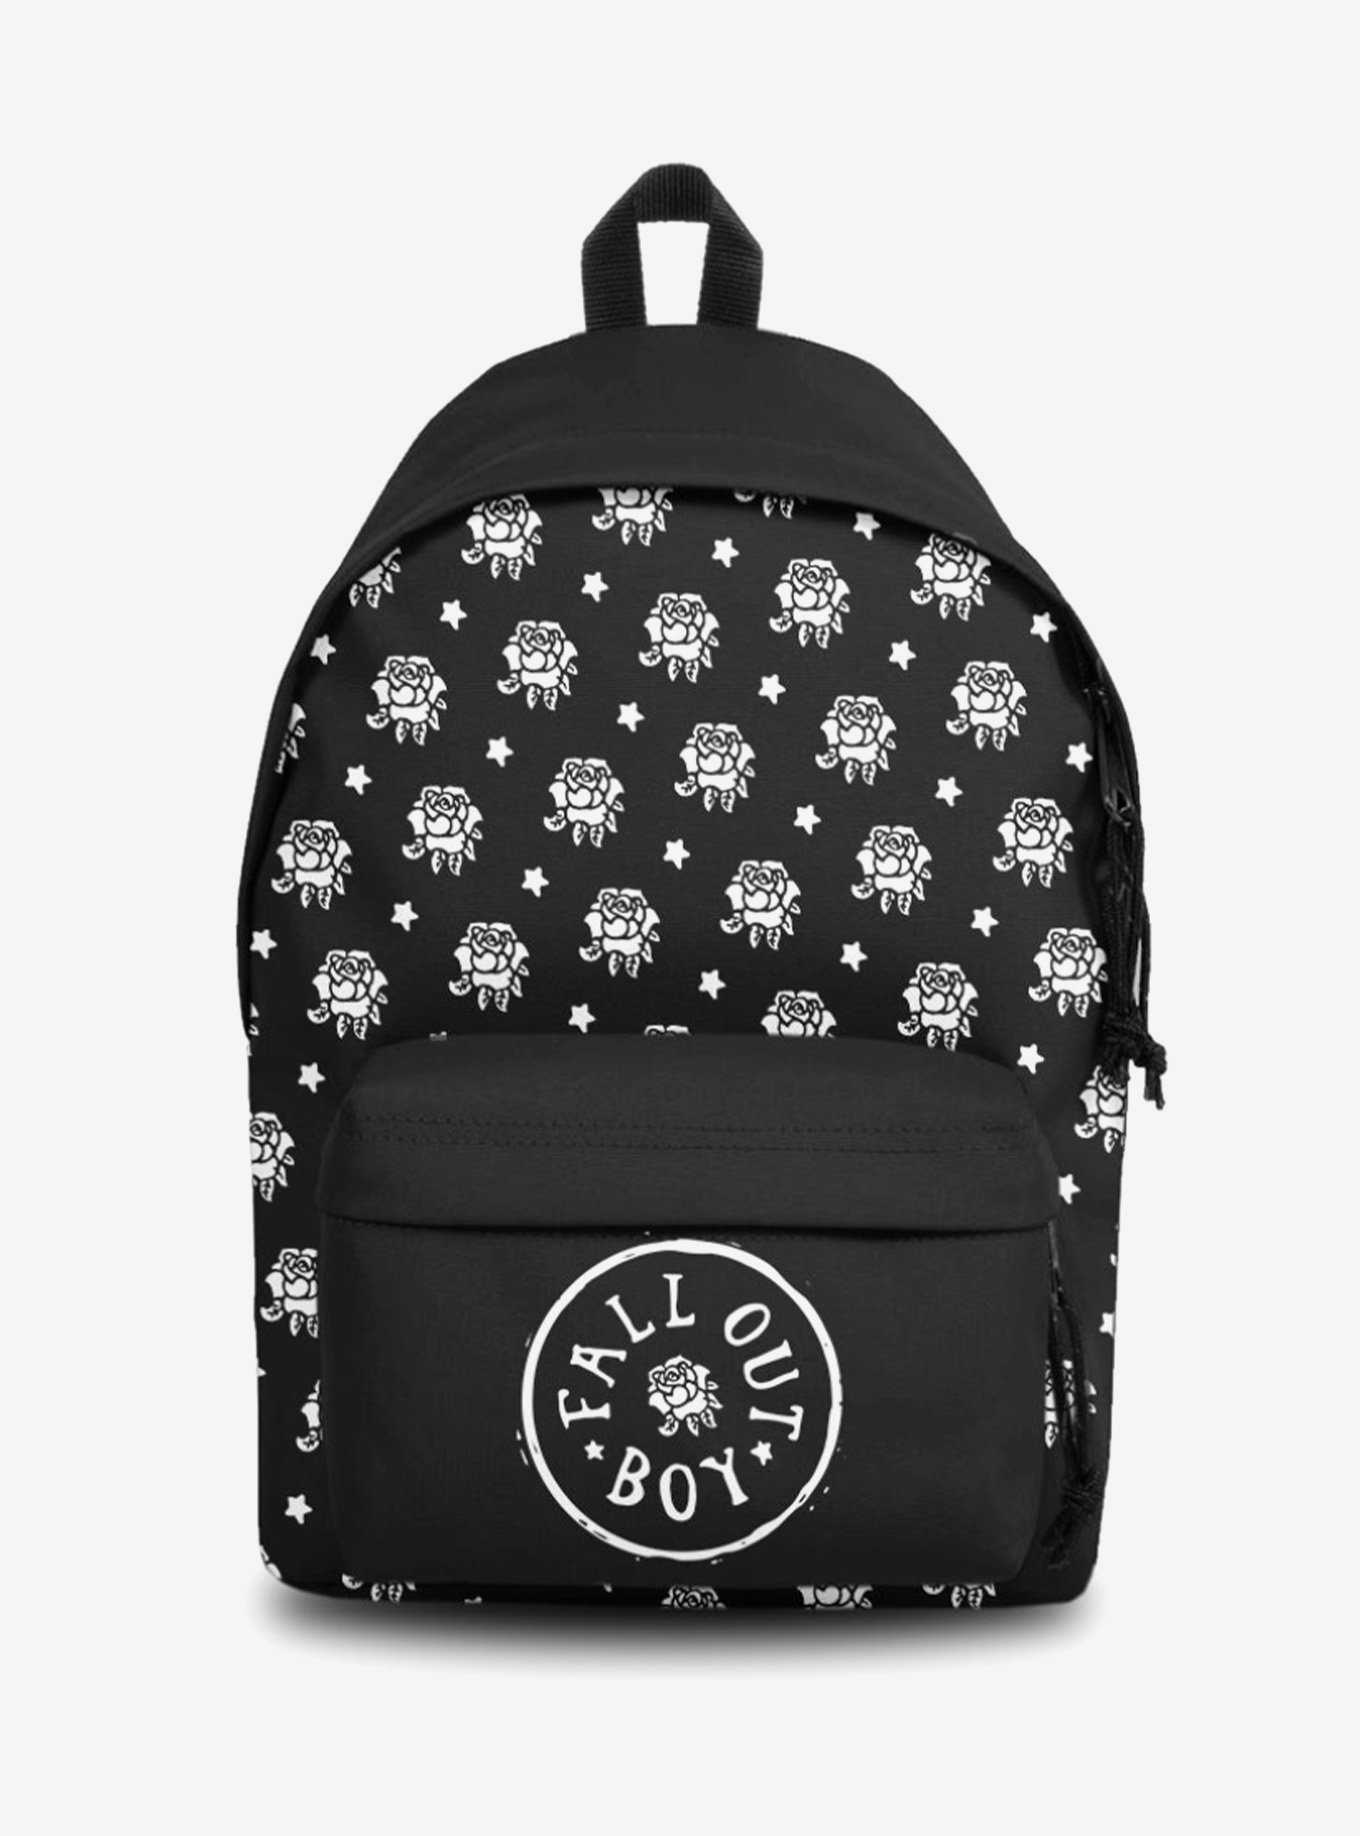 Rocksax Fall Out Boy Flowers Backpack, , hi-res